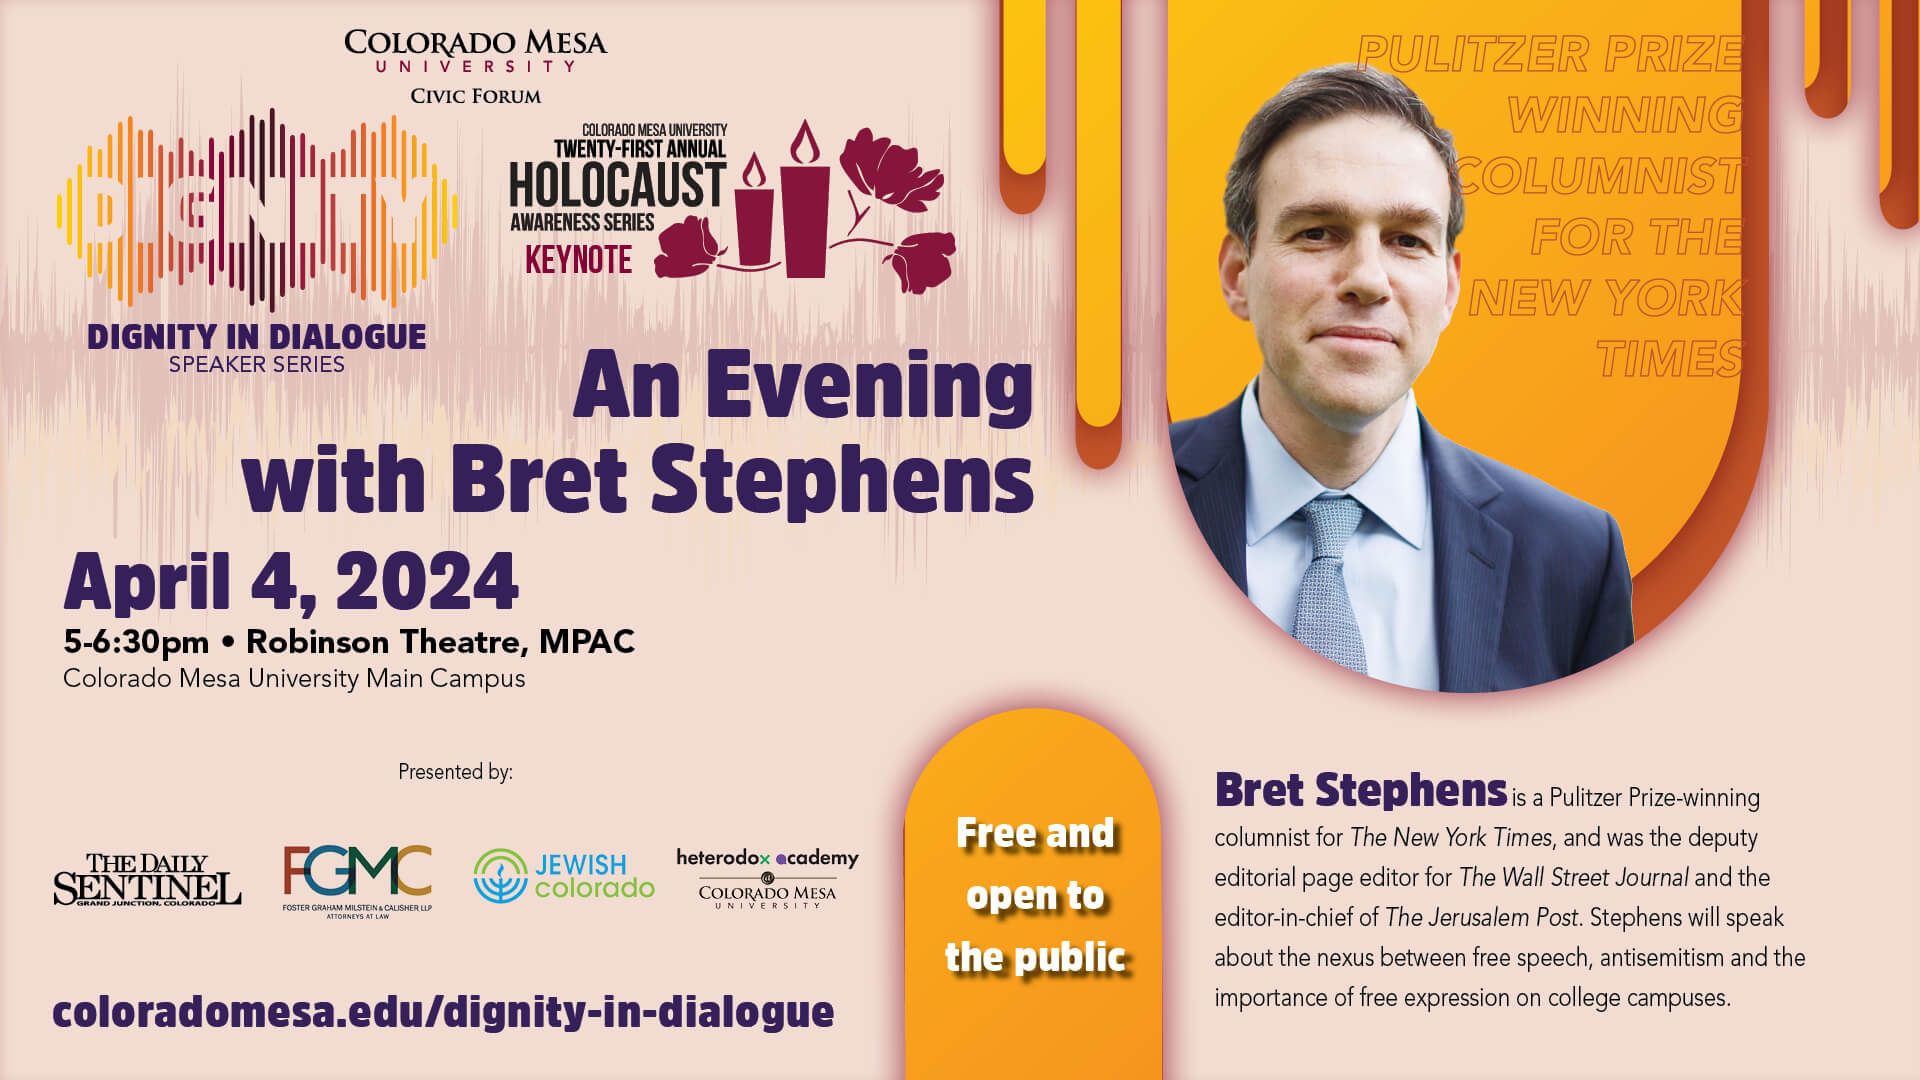 Colorado Mesa University Dignity in Dialogue with Bret Stephens